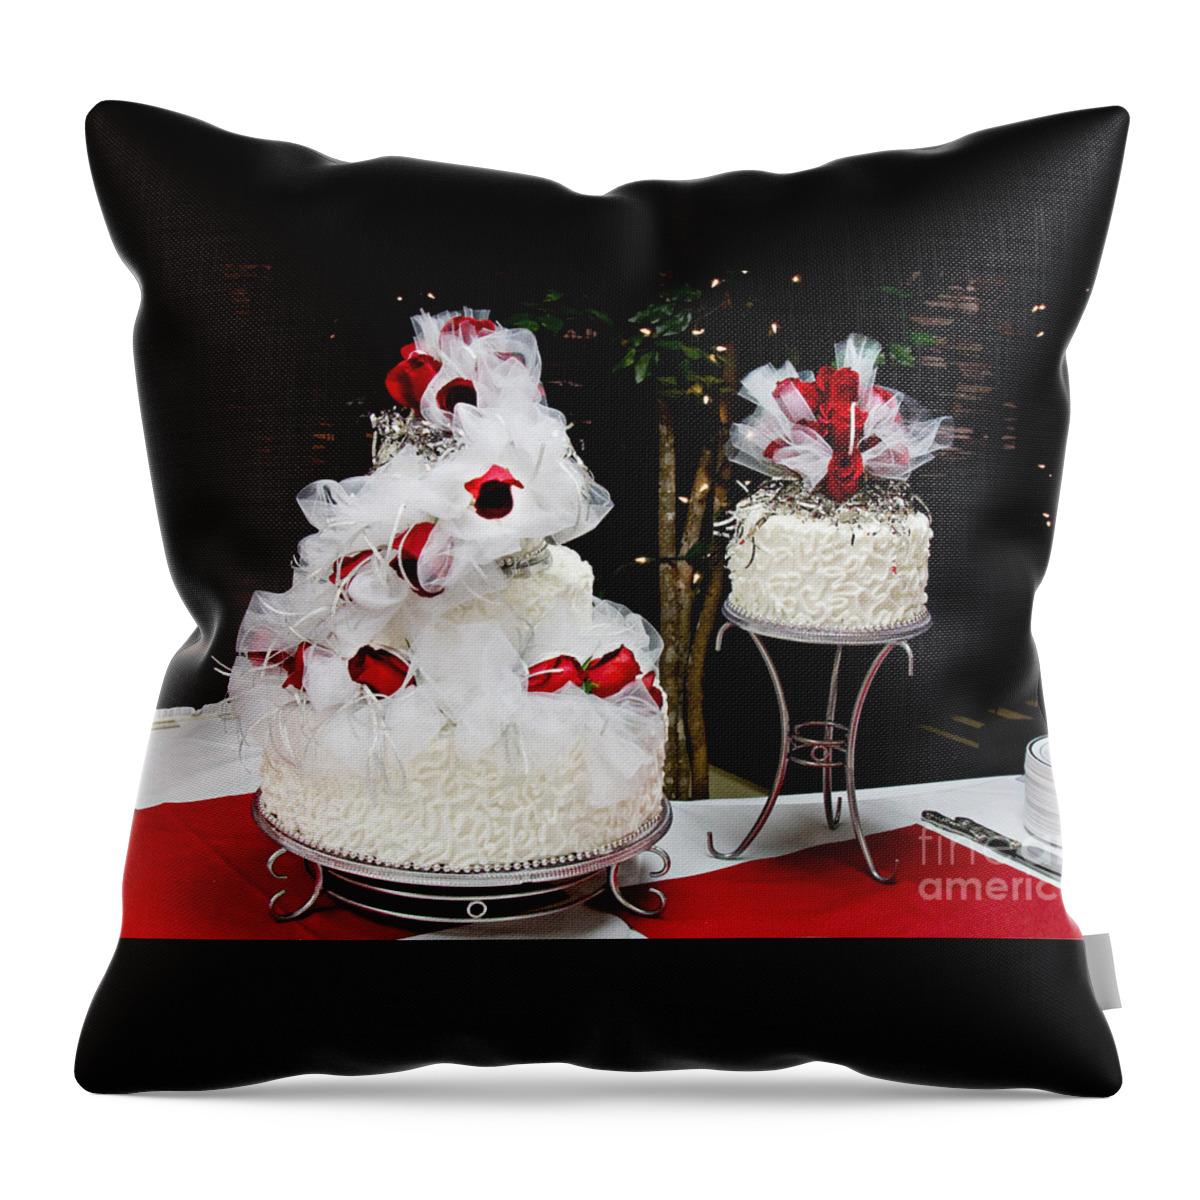 Cake Throw Pillow featuring the photograph Wedding Cake And Red Roses by Andee Design